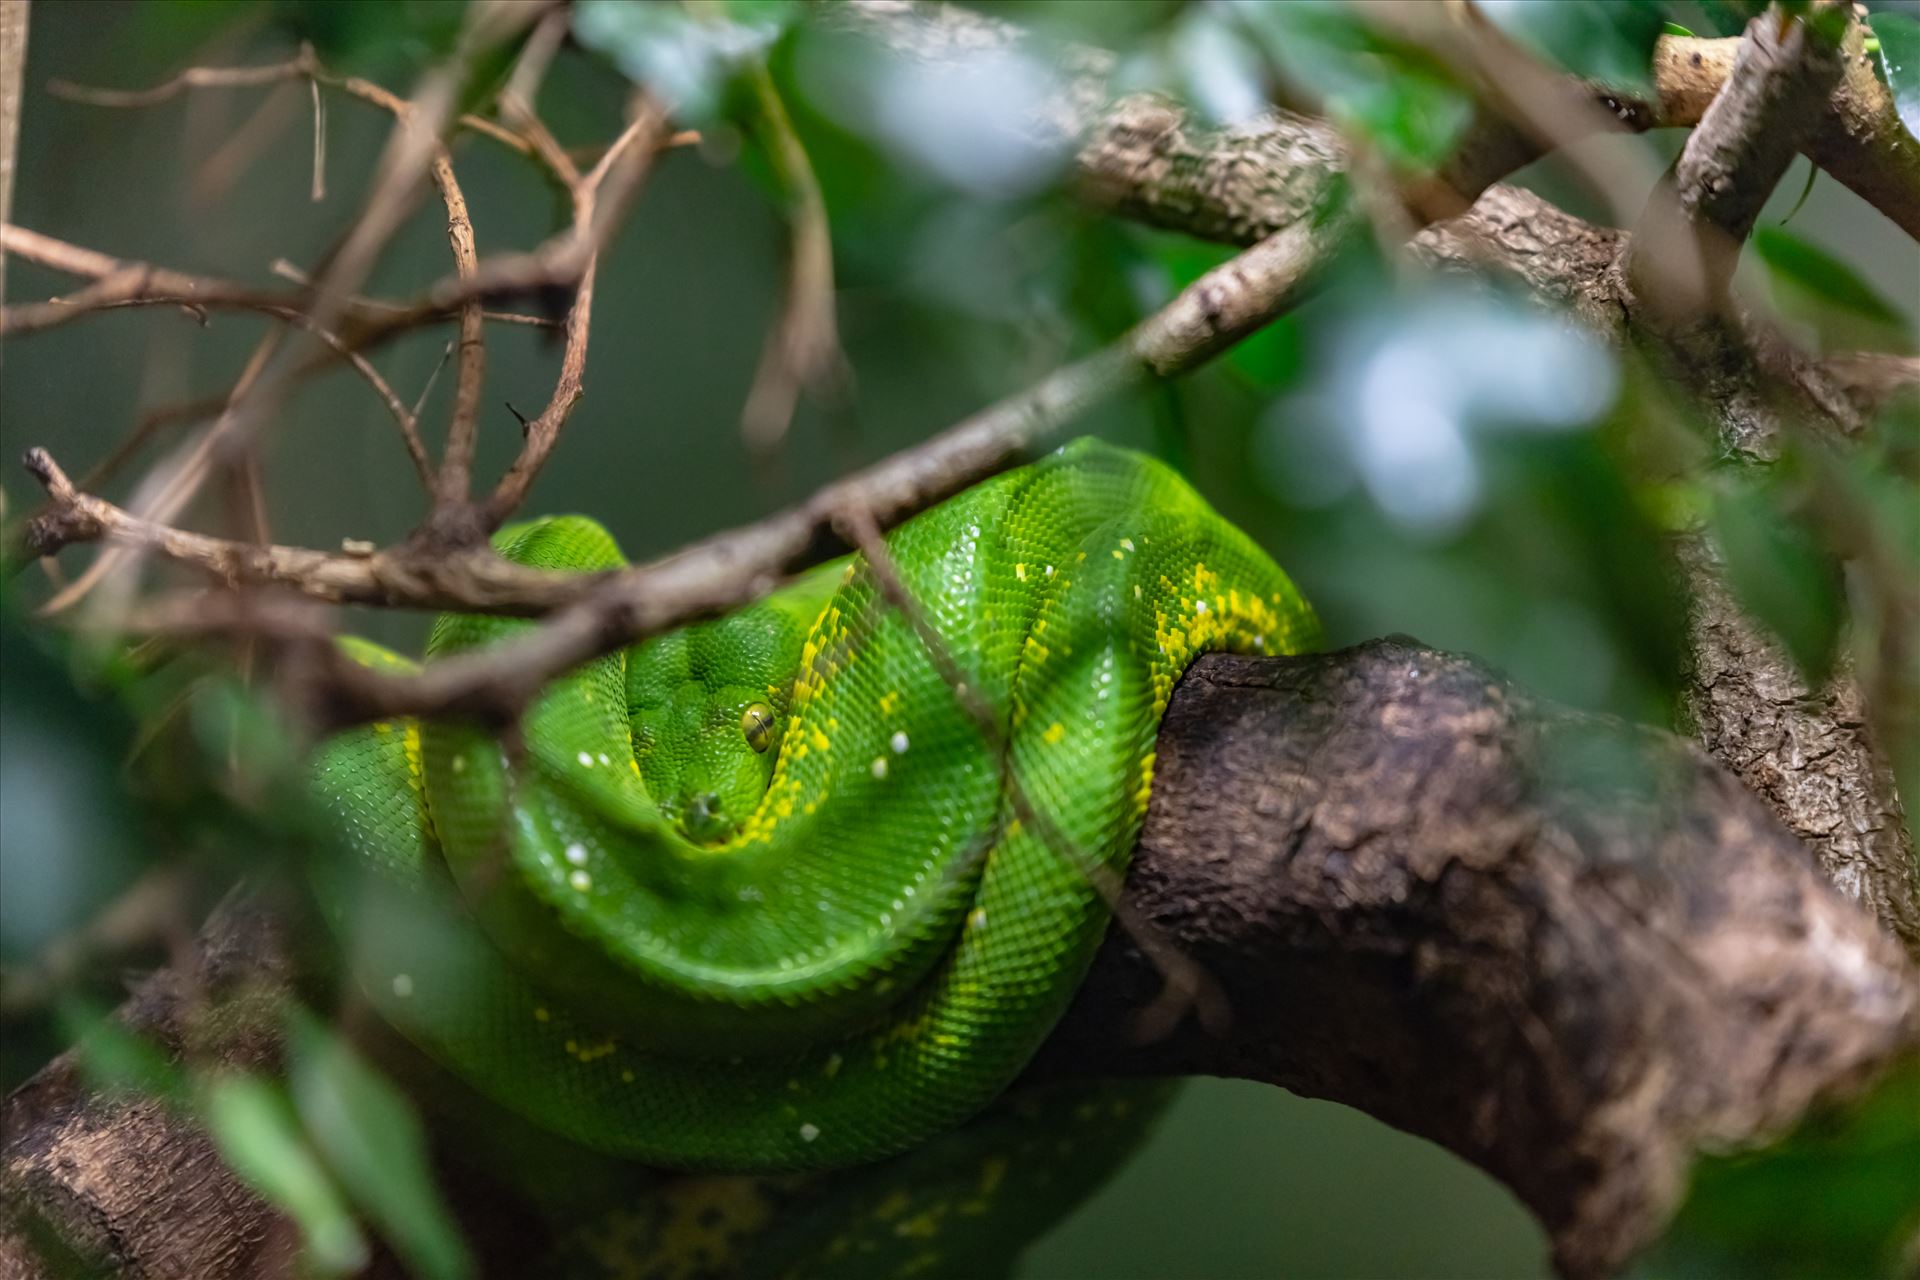 green tree python 8501457 ss as sf.jpg - green tree python wrapped around tree limb by Terry Kelly Photography